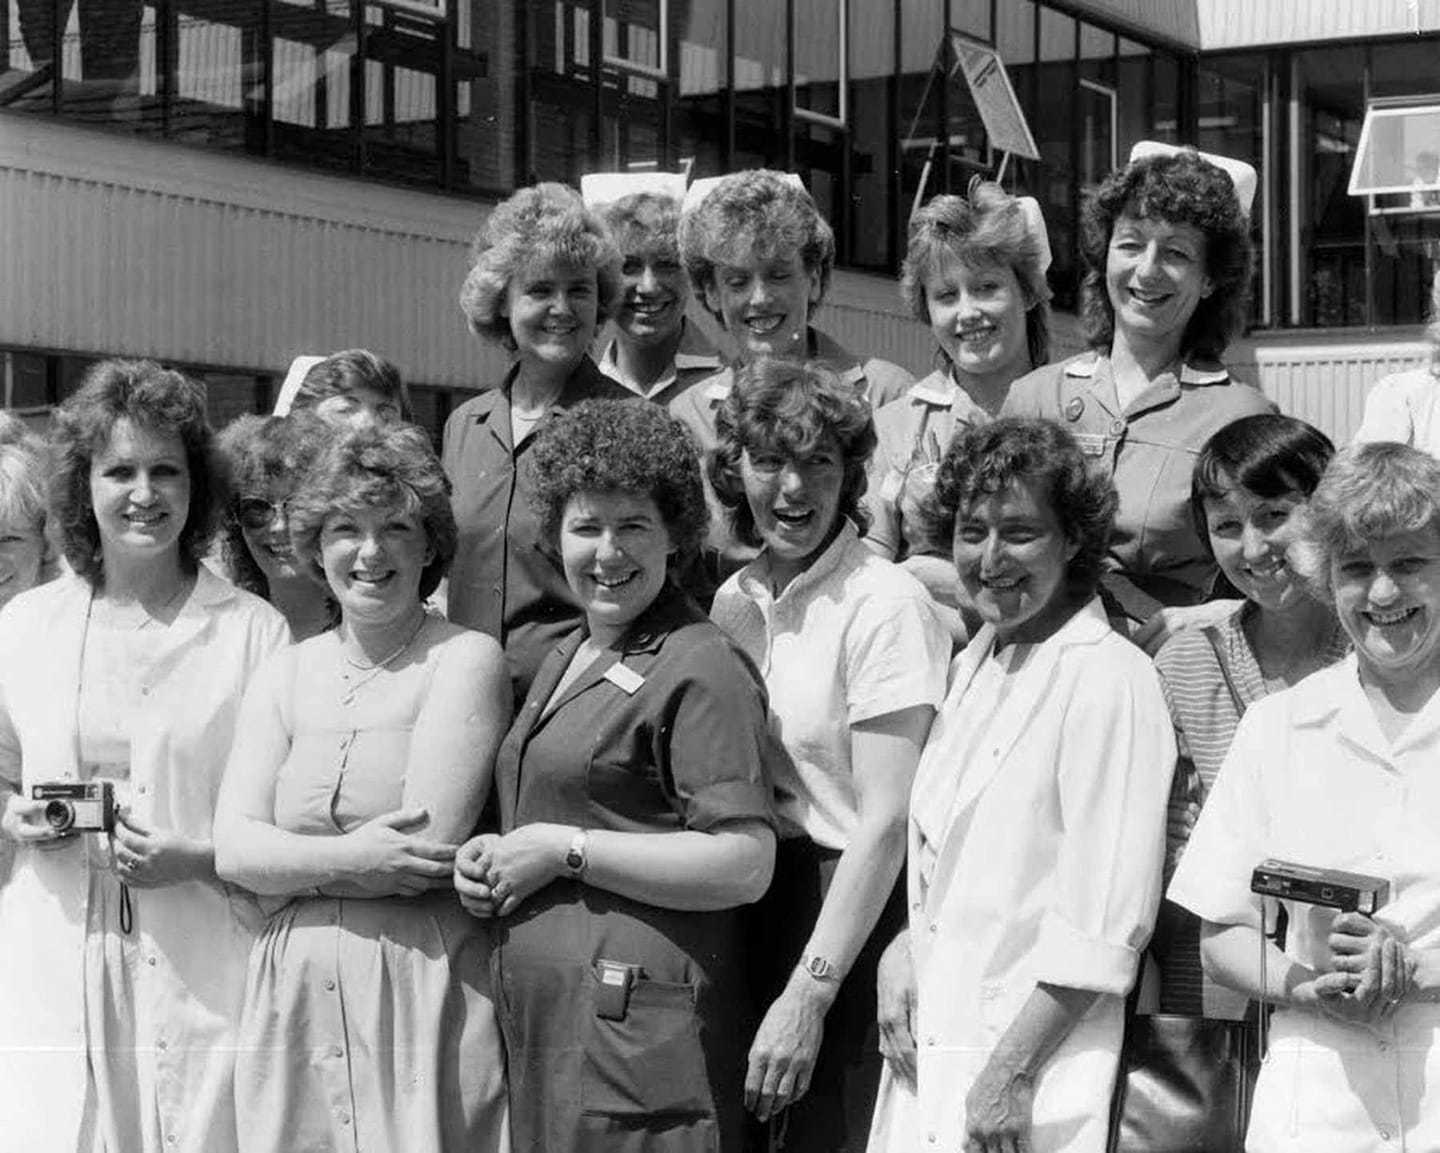 Staff at the Countess of Chester Hospital on May 30, 1984.